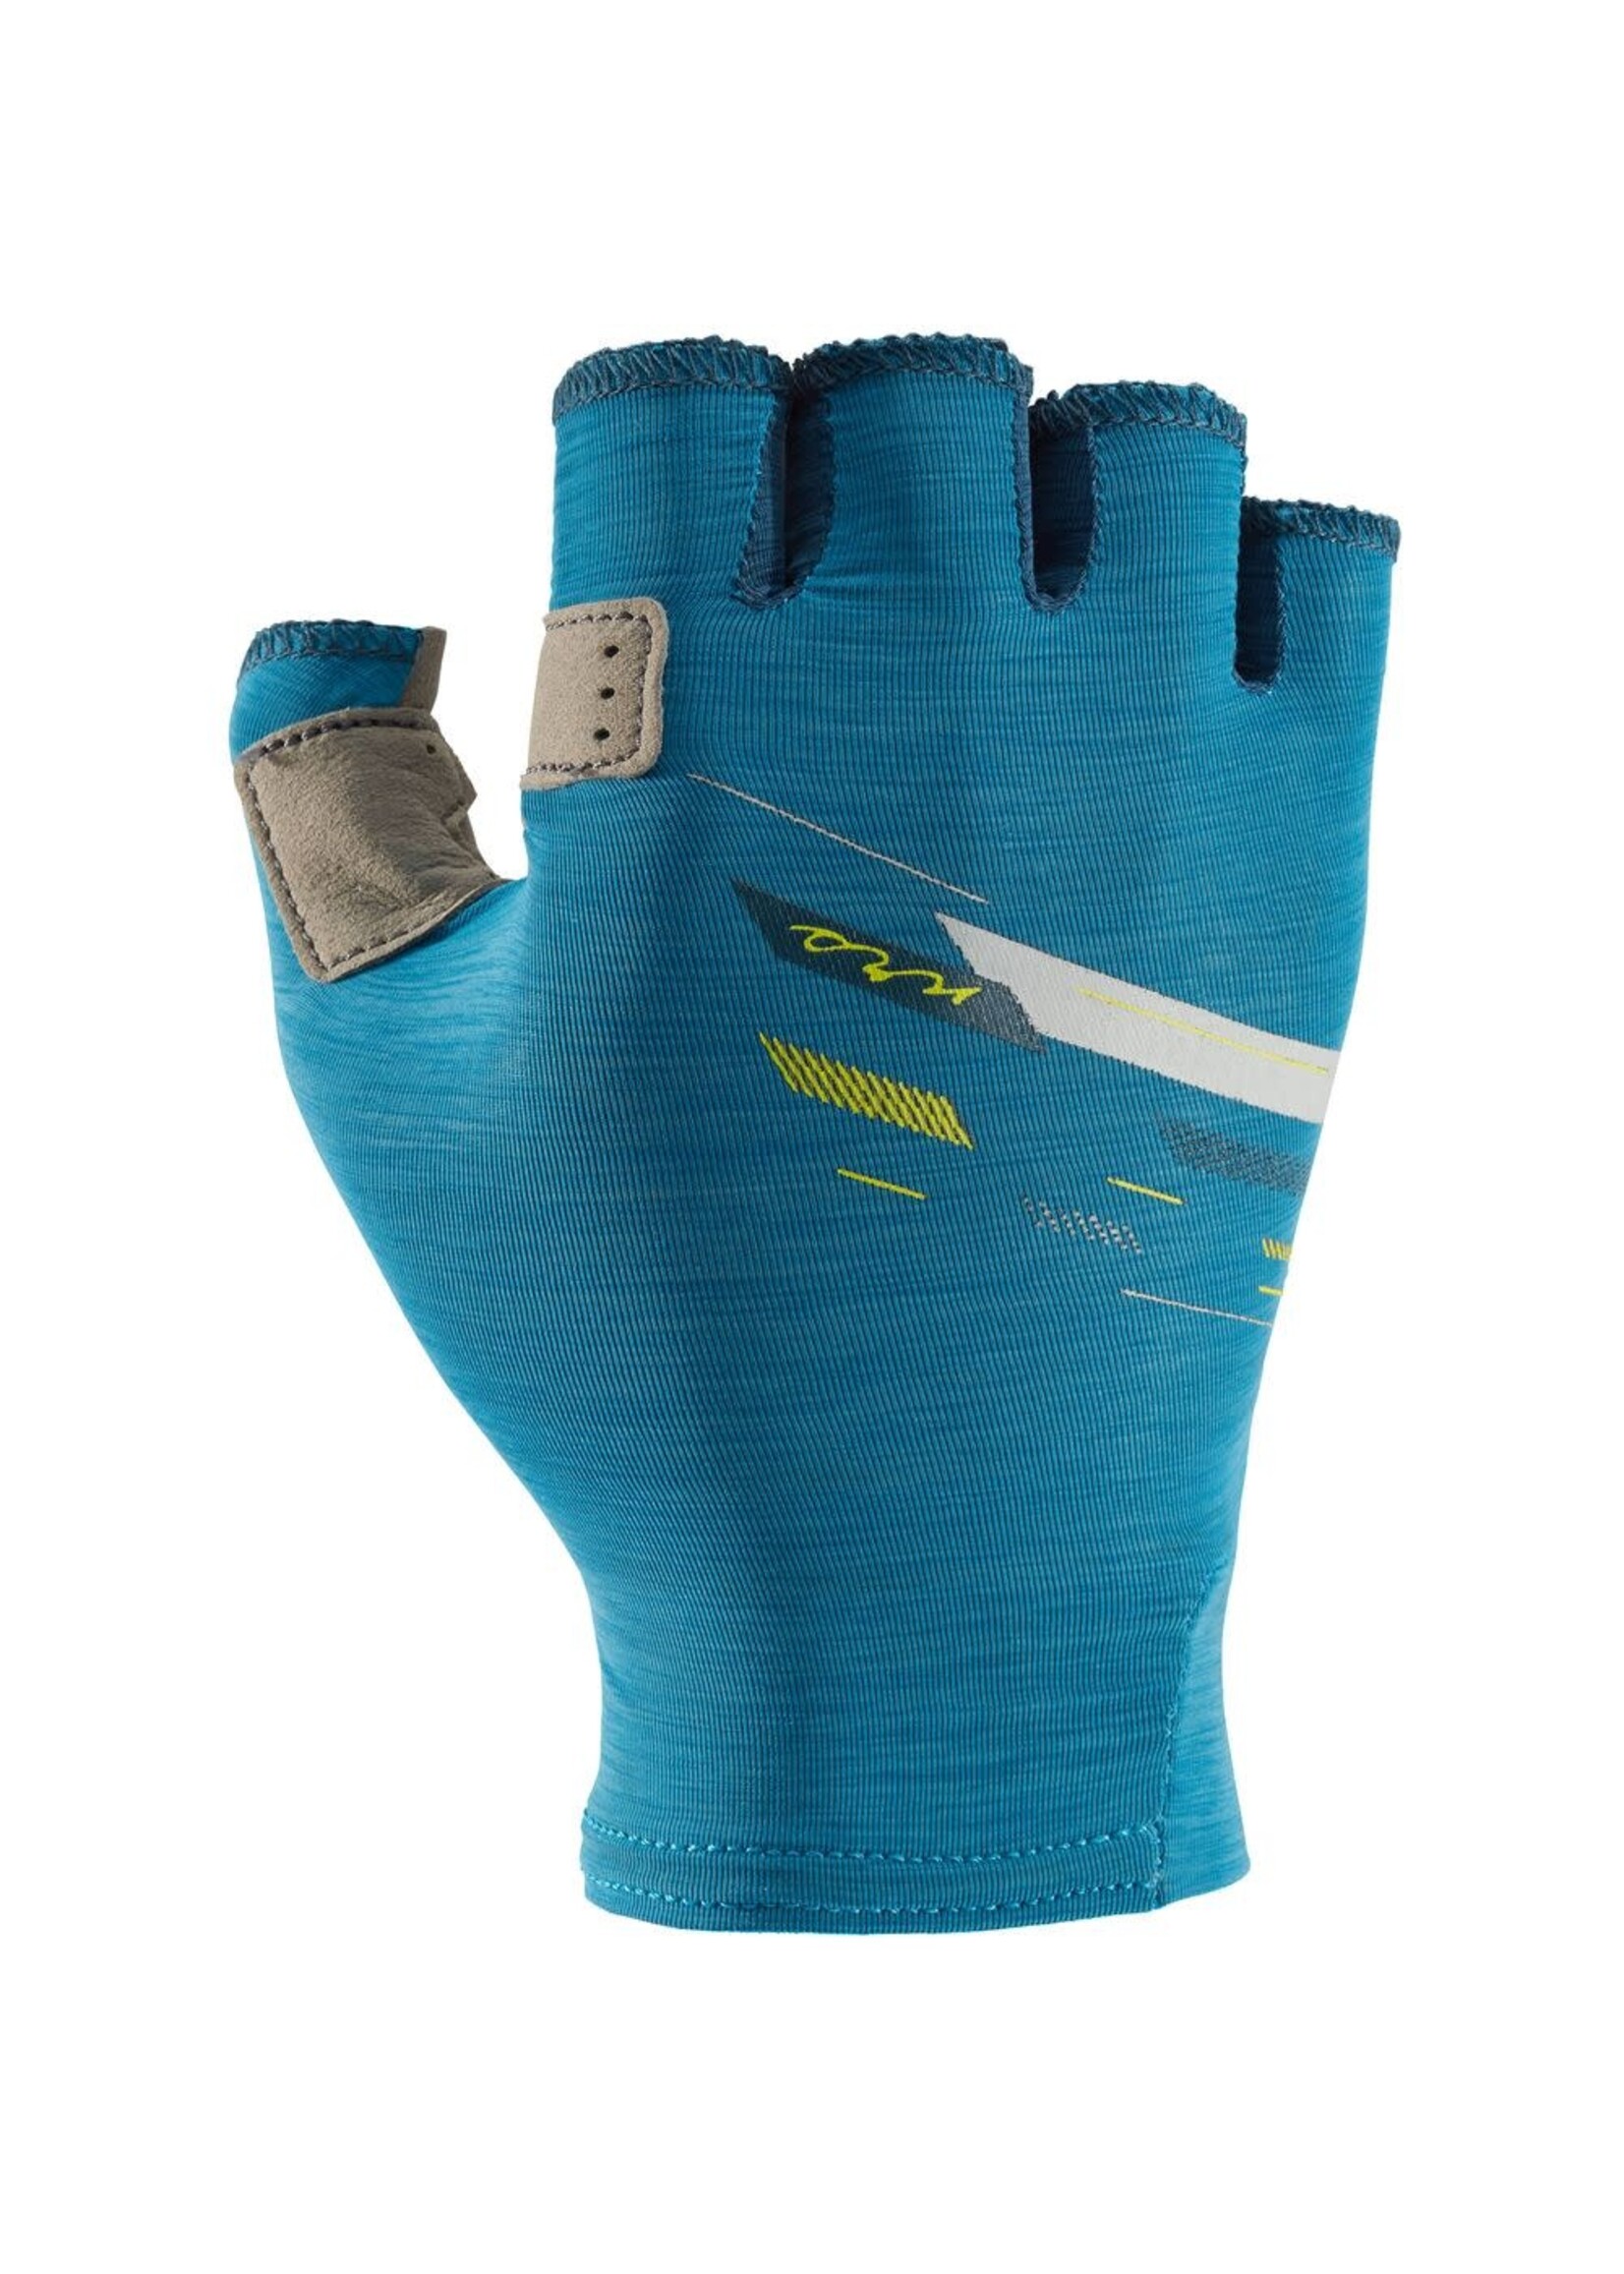 NRS NRS Womens Boater's Glove Fjord- L